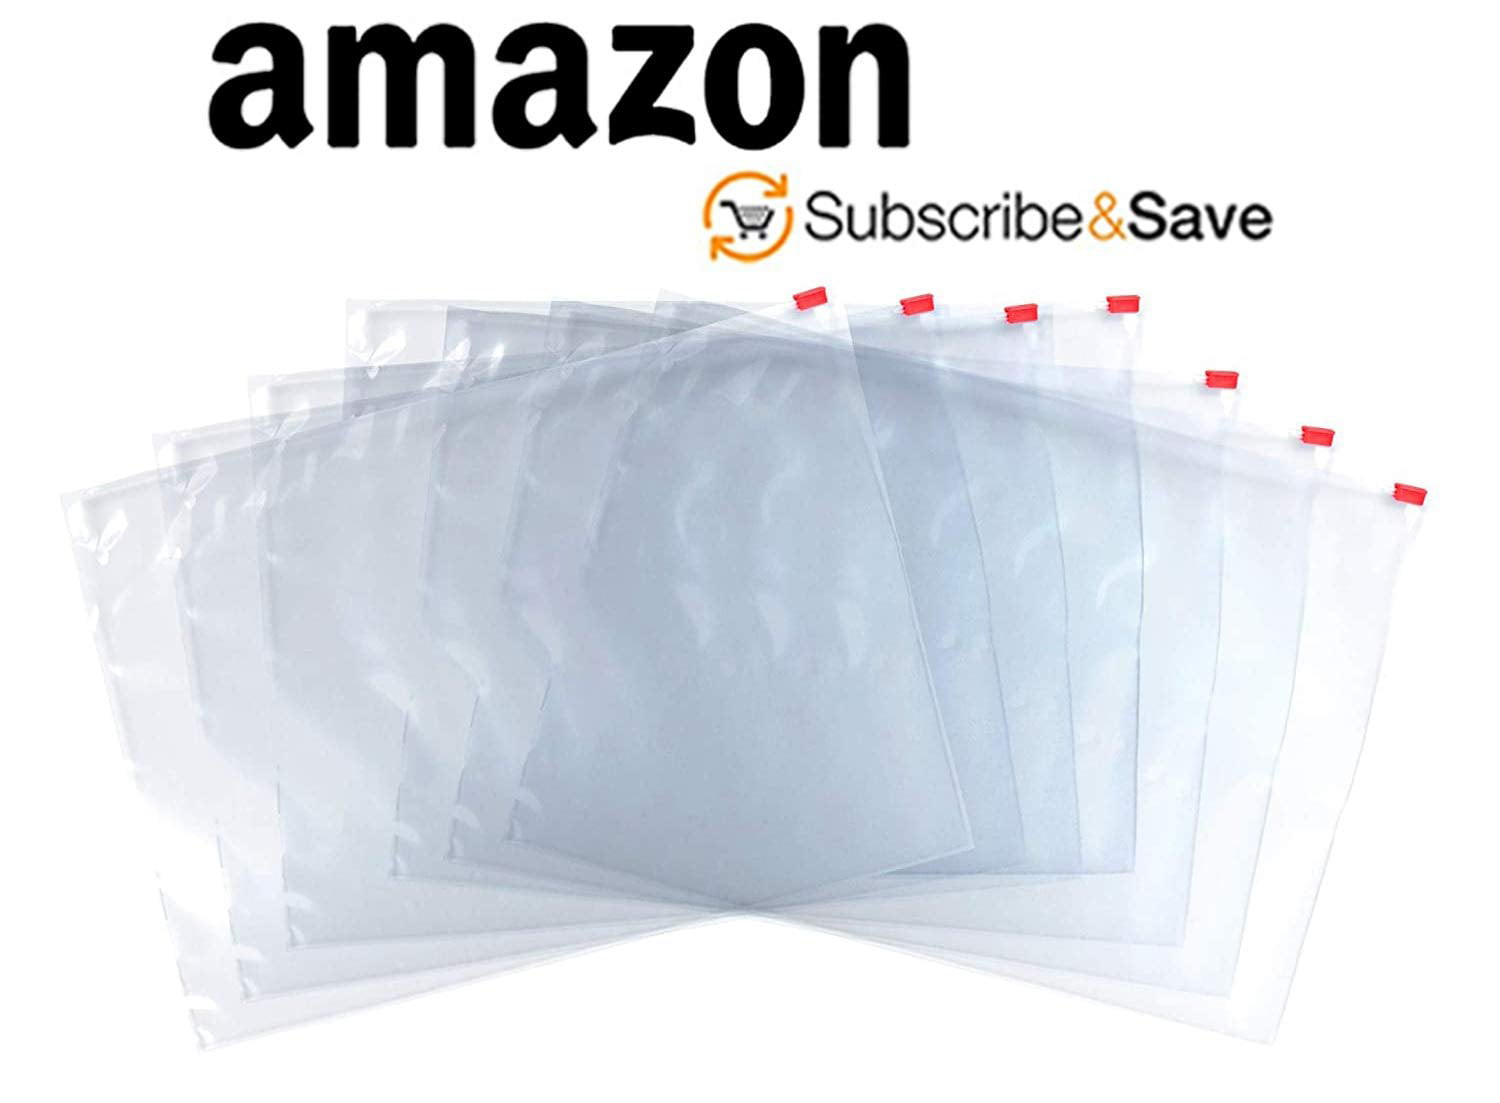 30pcs Frosted Slide Zip Plastic Bags,Large Ziplock Space Saver Bags for Storing Luggage,Clothes,Shoes,3.2 Mil Reclosable Clear Poly Bags,10x14 inch